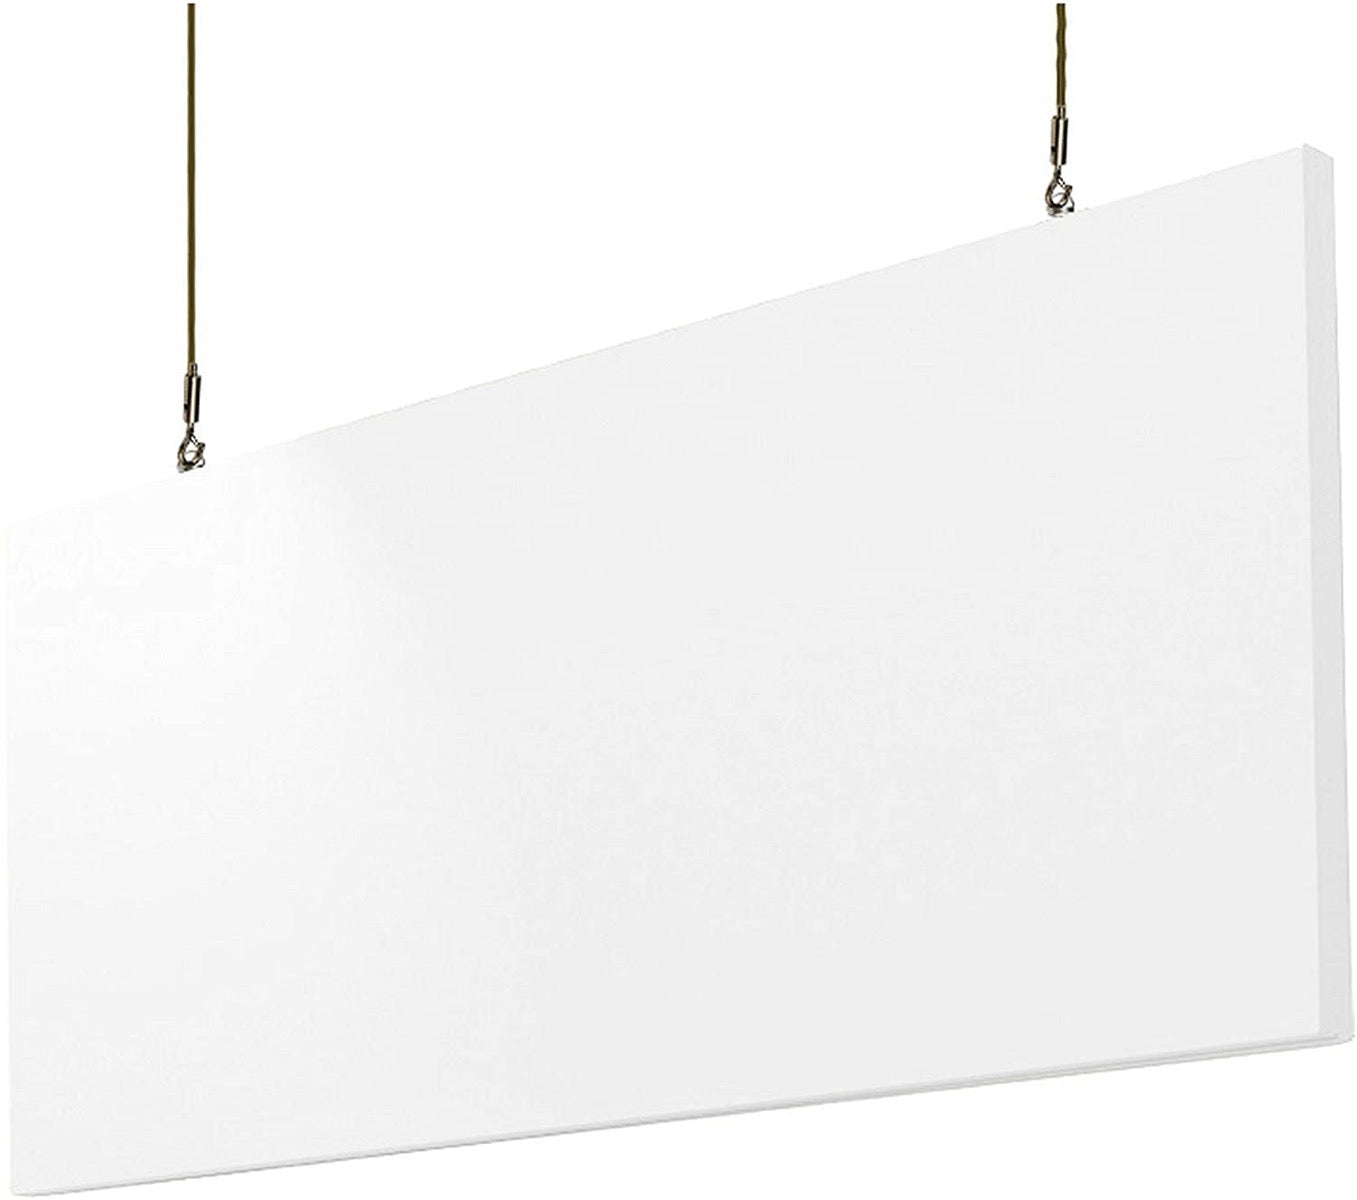 Primacoustic Saturna Ceiling Hanging Baffle - White - 24" x 48" x 1.5"